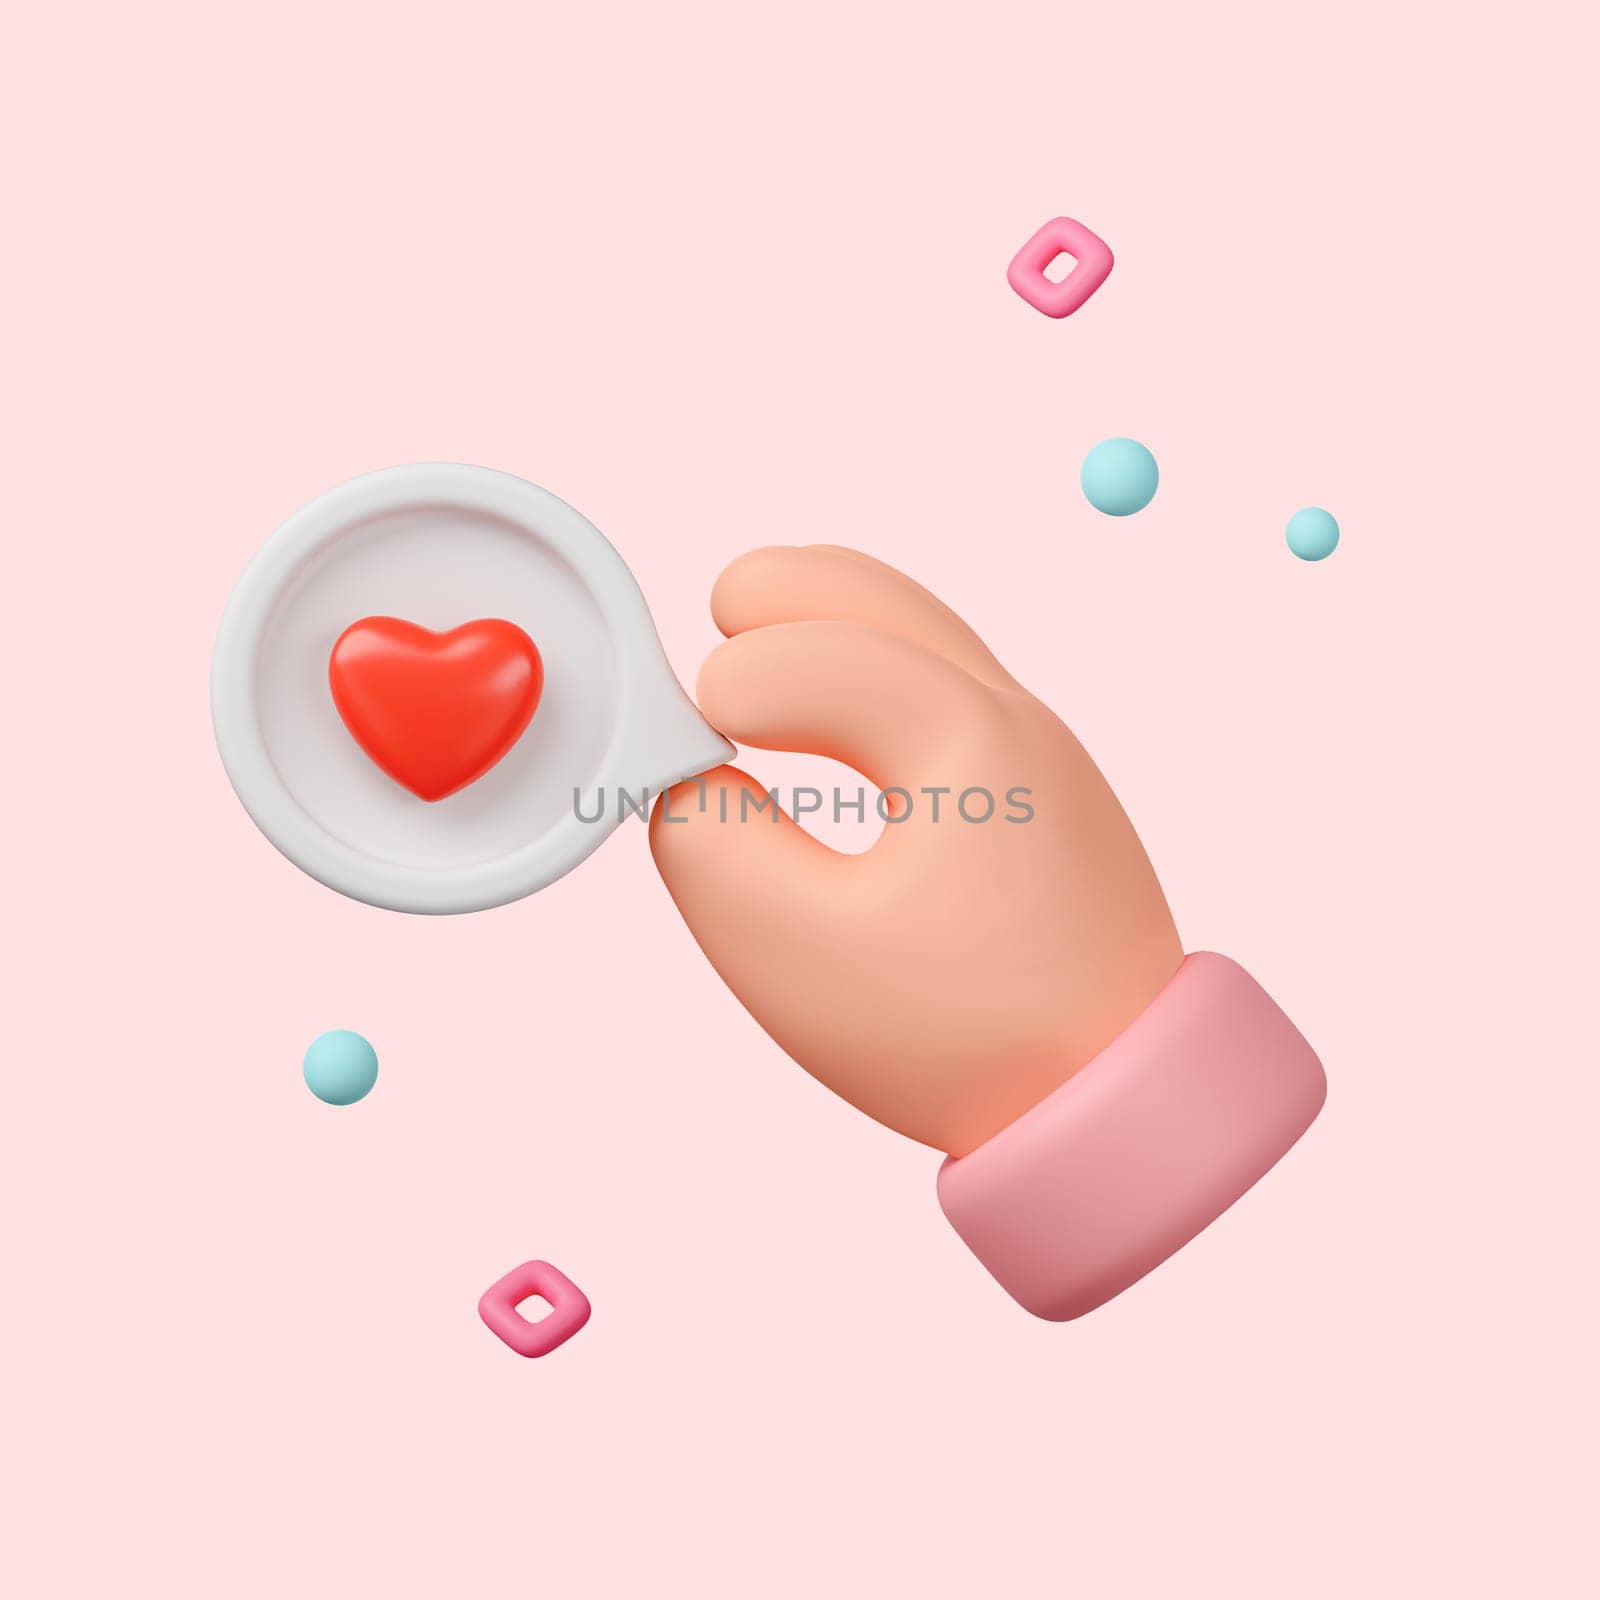 Cartoon character hand hold and give like symbol icon on a white pin and red heart isolated over pink background with clipping path. 3d rendering.